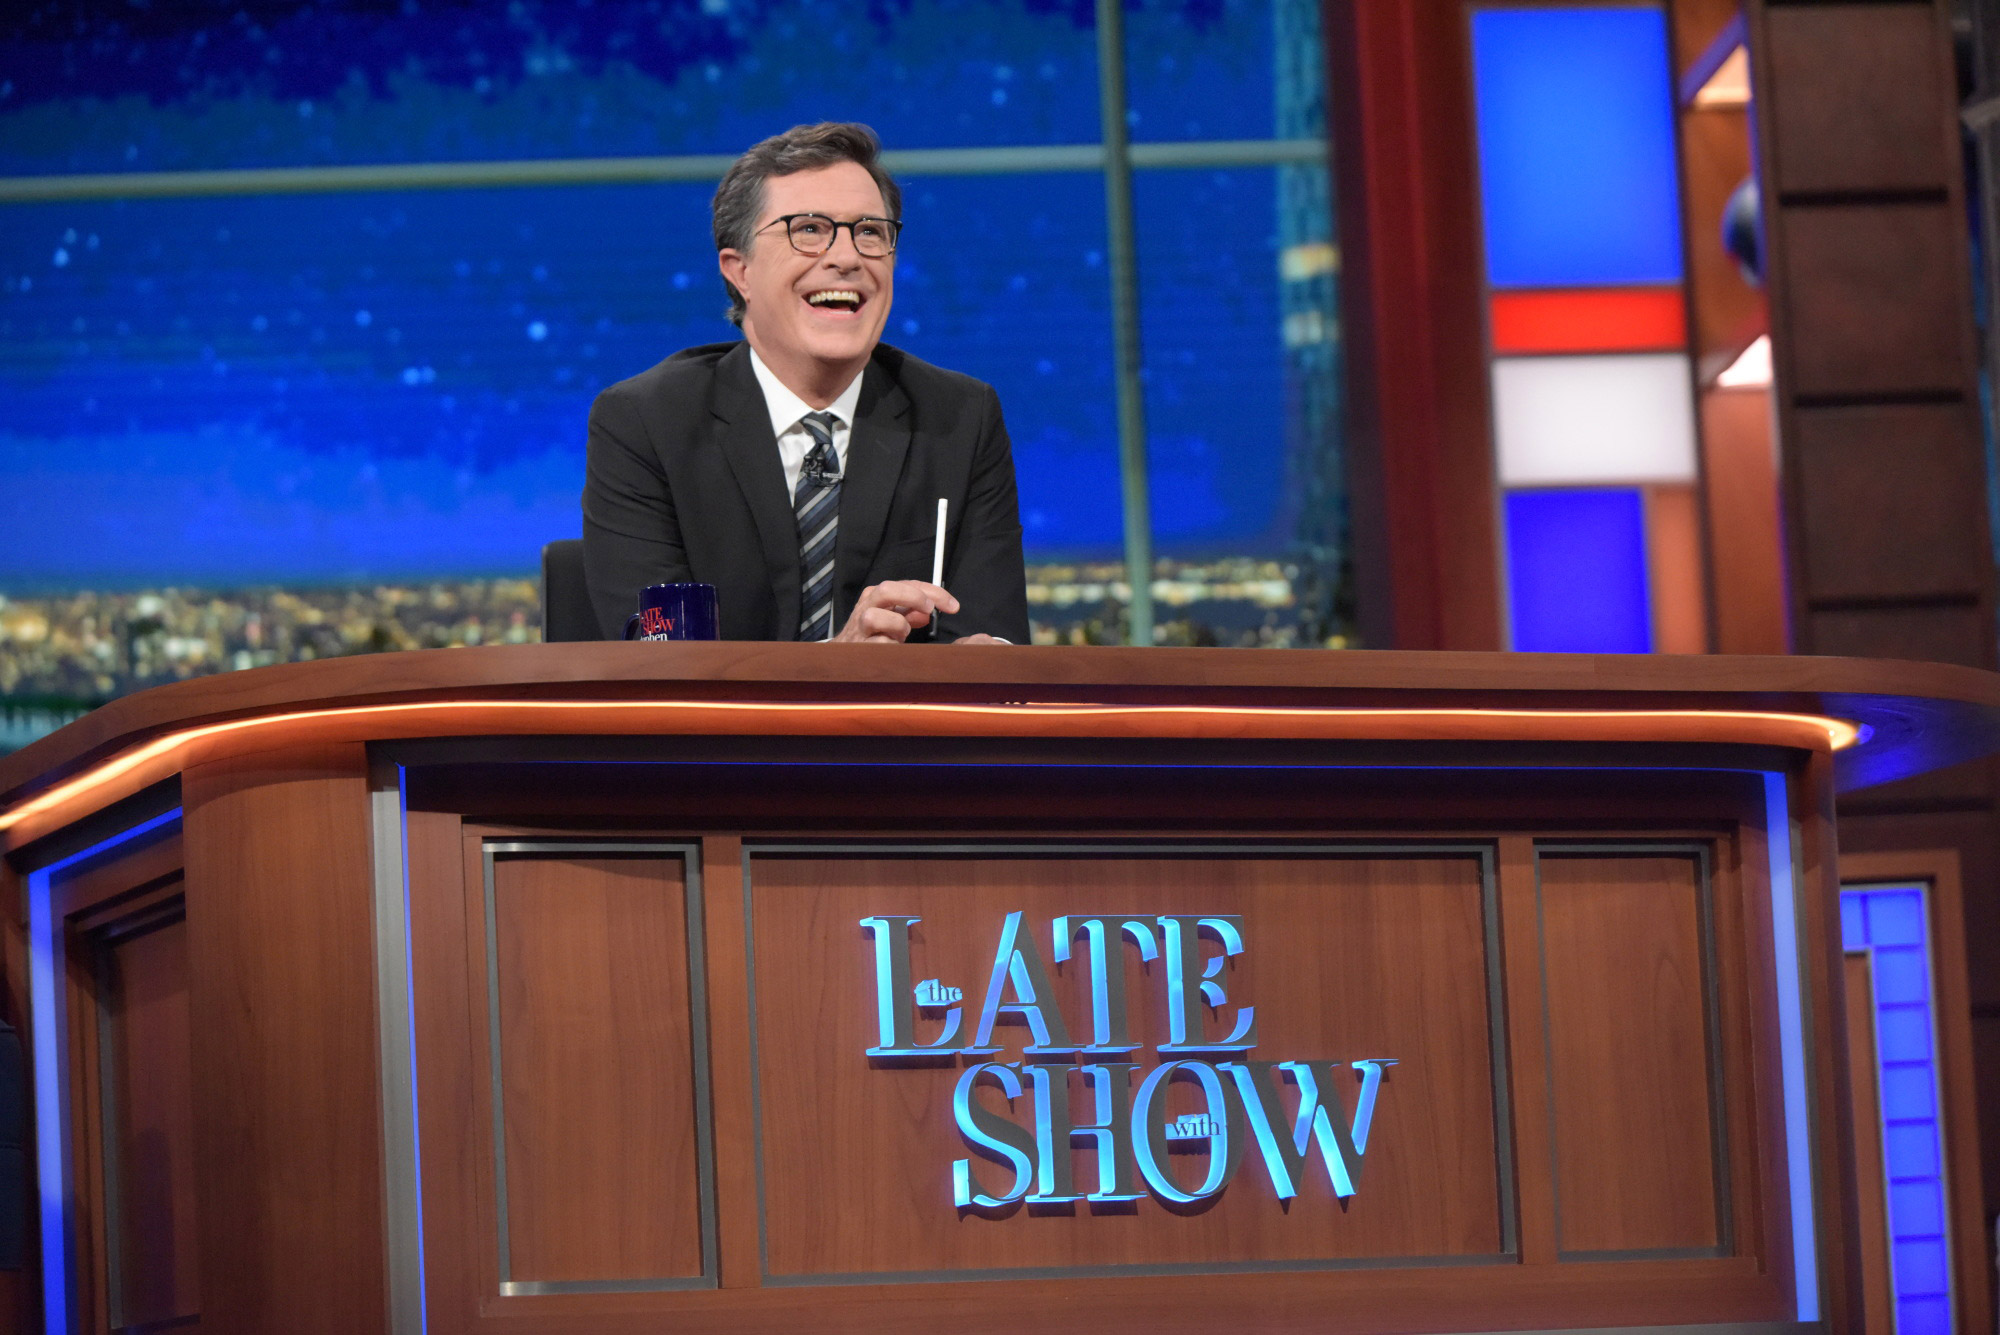 "The Late Show" with Stephen Colbert airing live in New York. (Scott Kowalchyk—CBS Photo Archive/Getty Images)